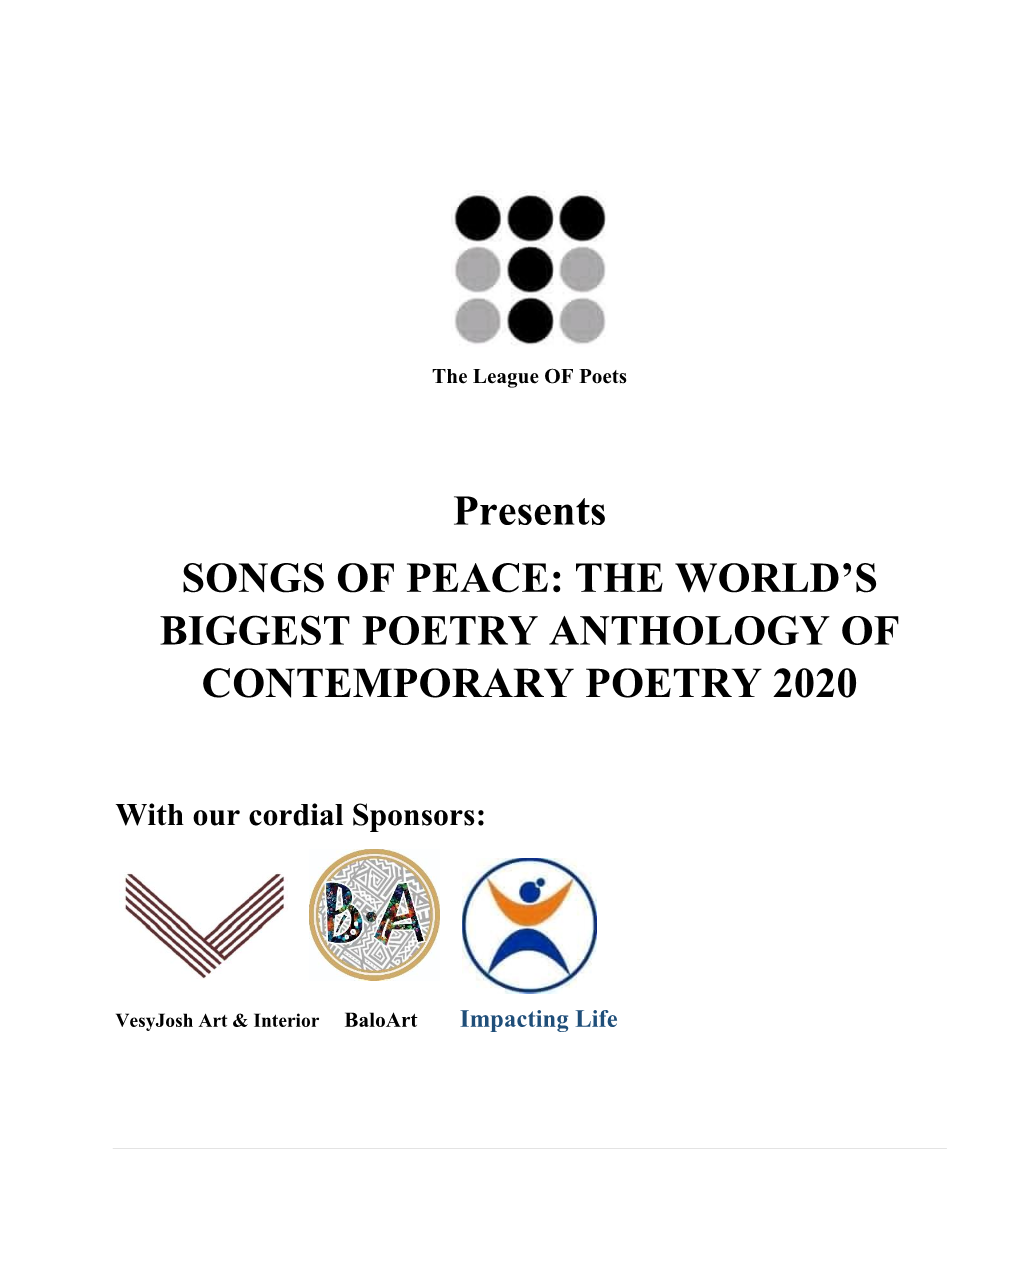 Presents SONGS of PEACE: the WORLD's BIGGEST POETRY ANTHOLOGY of CONTEMPORARY POETRY 2020